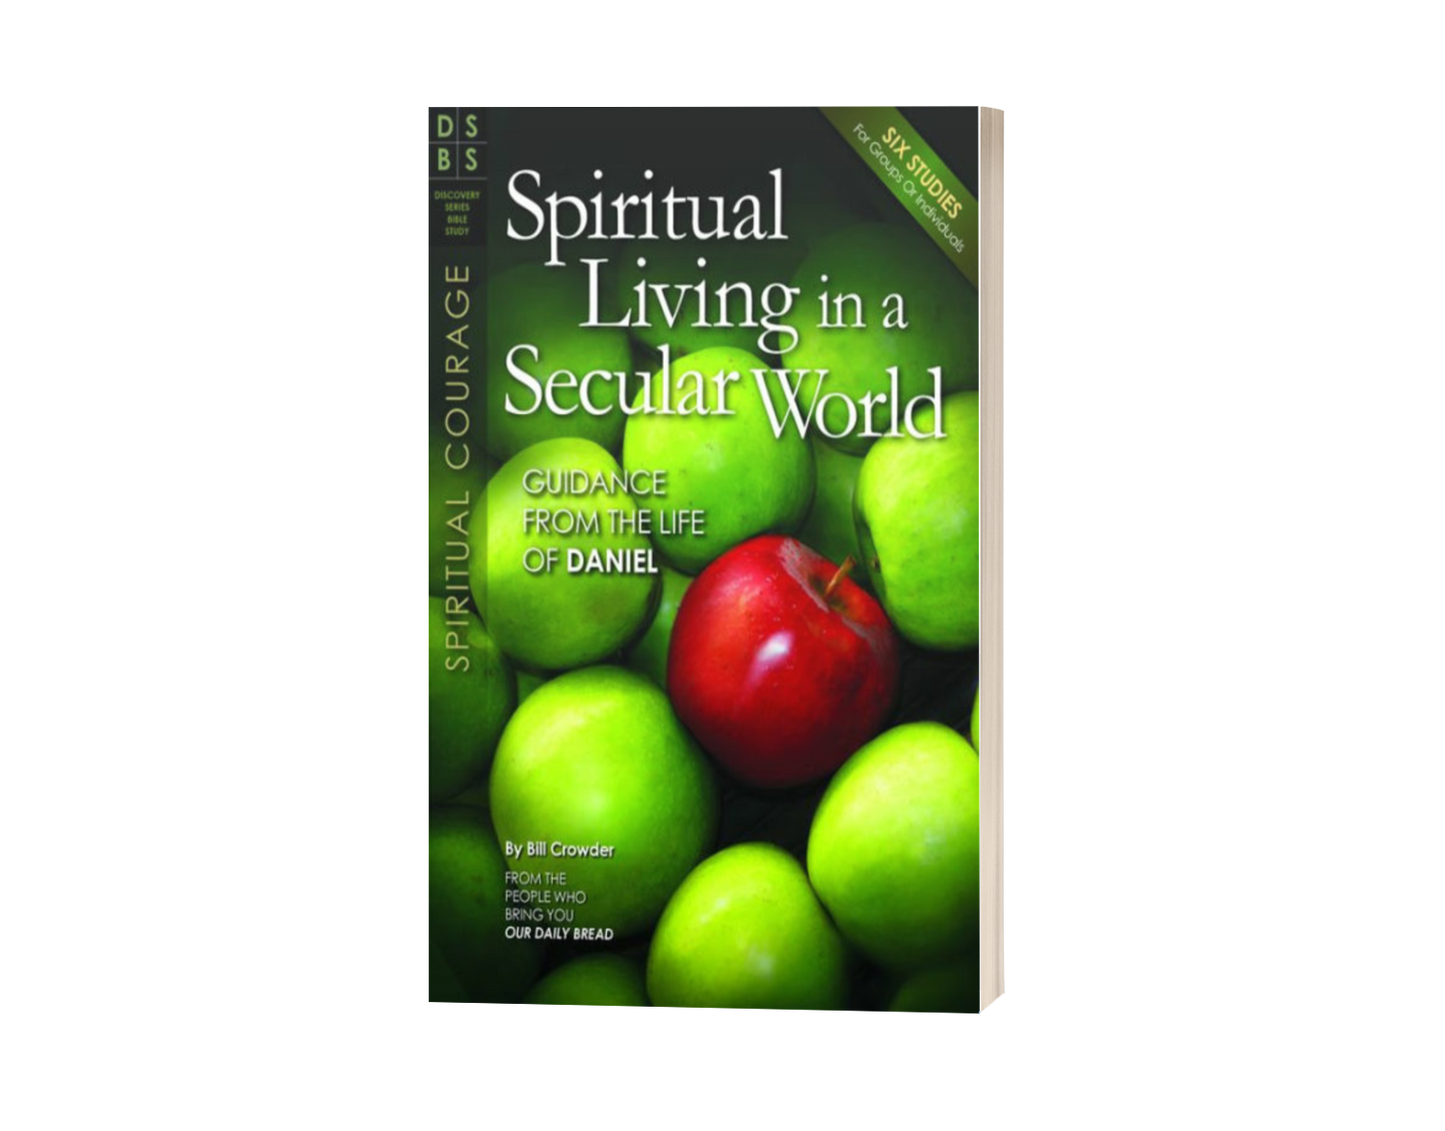 Spiritual Living in a Secular World: Guidance from the Life of Danie